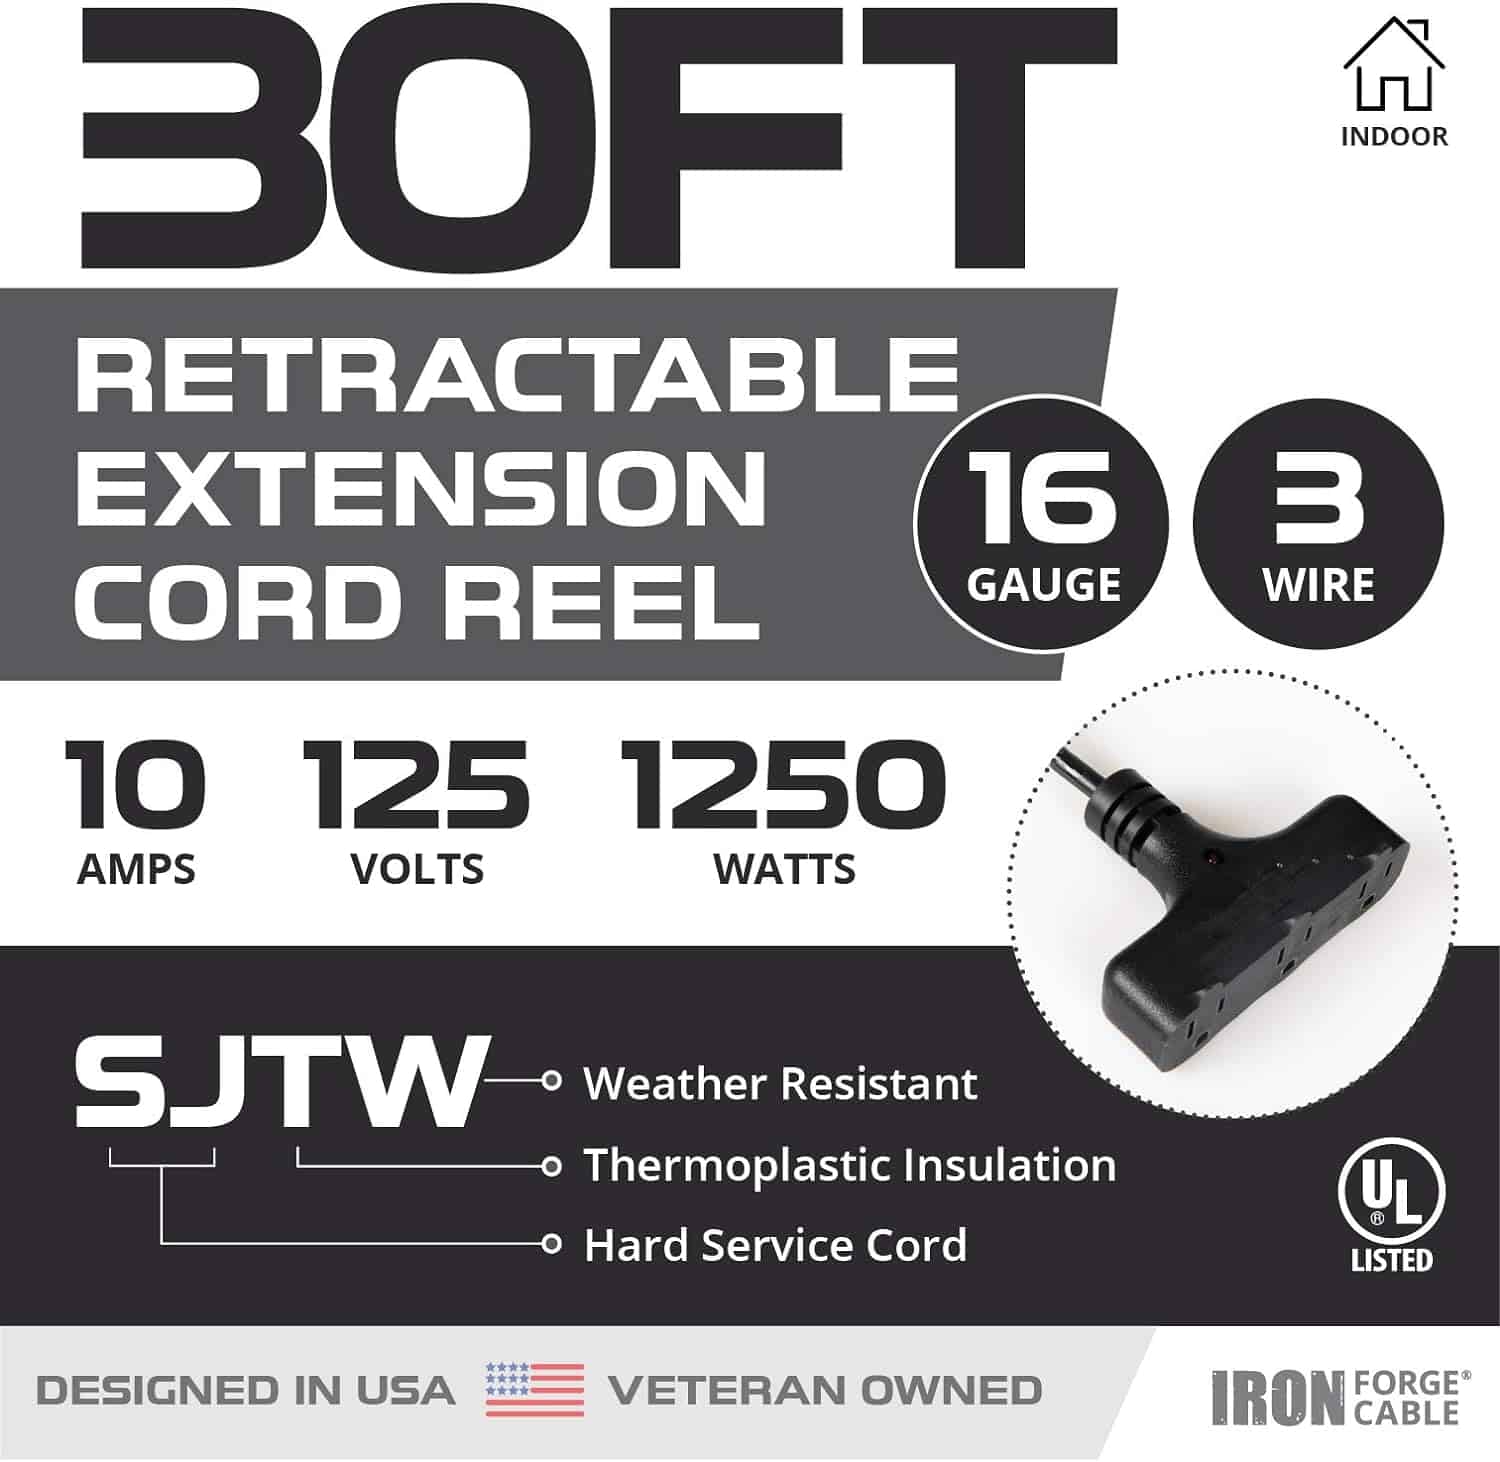 Iron-Forge-Cable-30-Ft-Retractable-Extension-Cord-Reel-with-Breaker-Switch-3-Outlets-Pigtail-Metal-Plate-Ceiling-Wall-Mount-Hanging-Extension-Cord-Reel-16-3-SJTW-Retractable-Cable-for-Garage-Shop